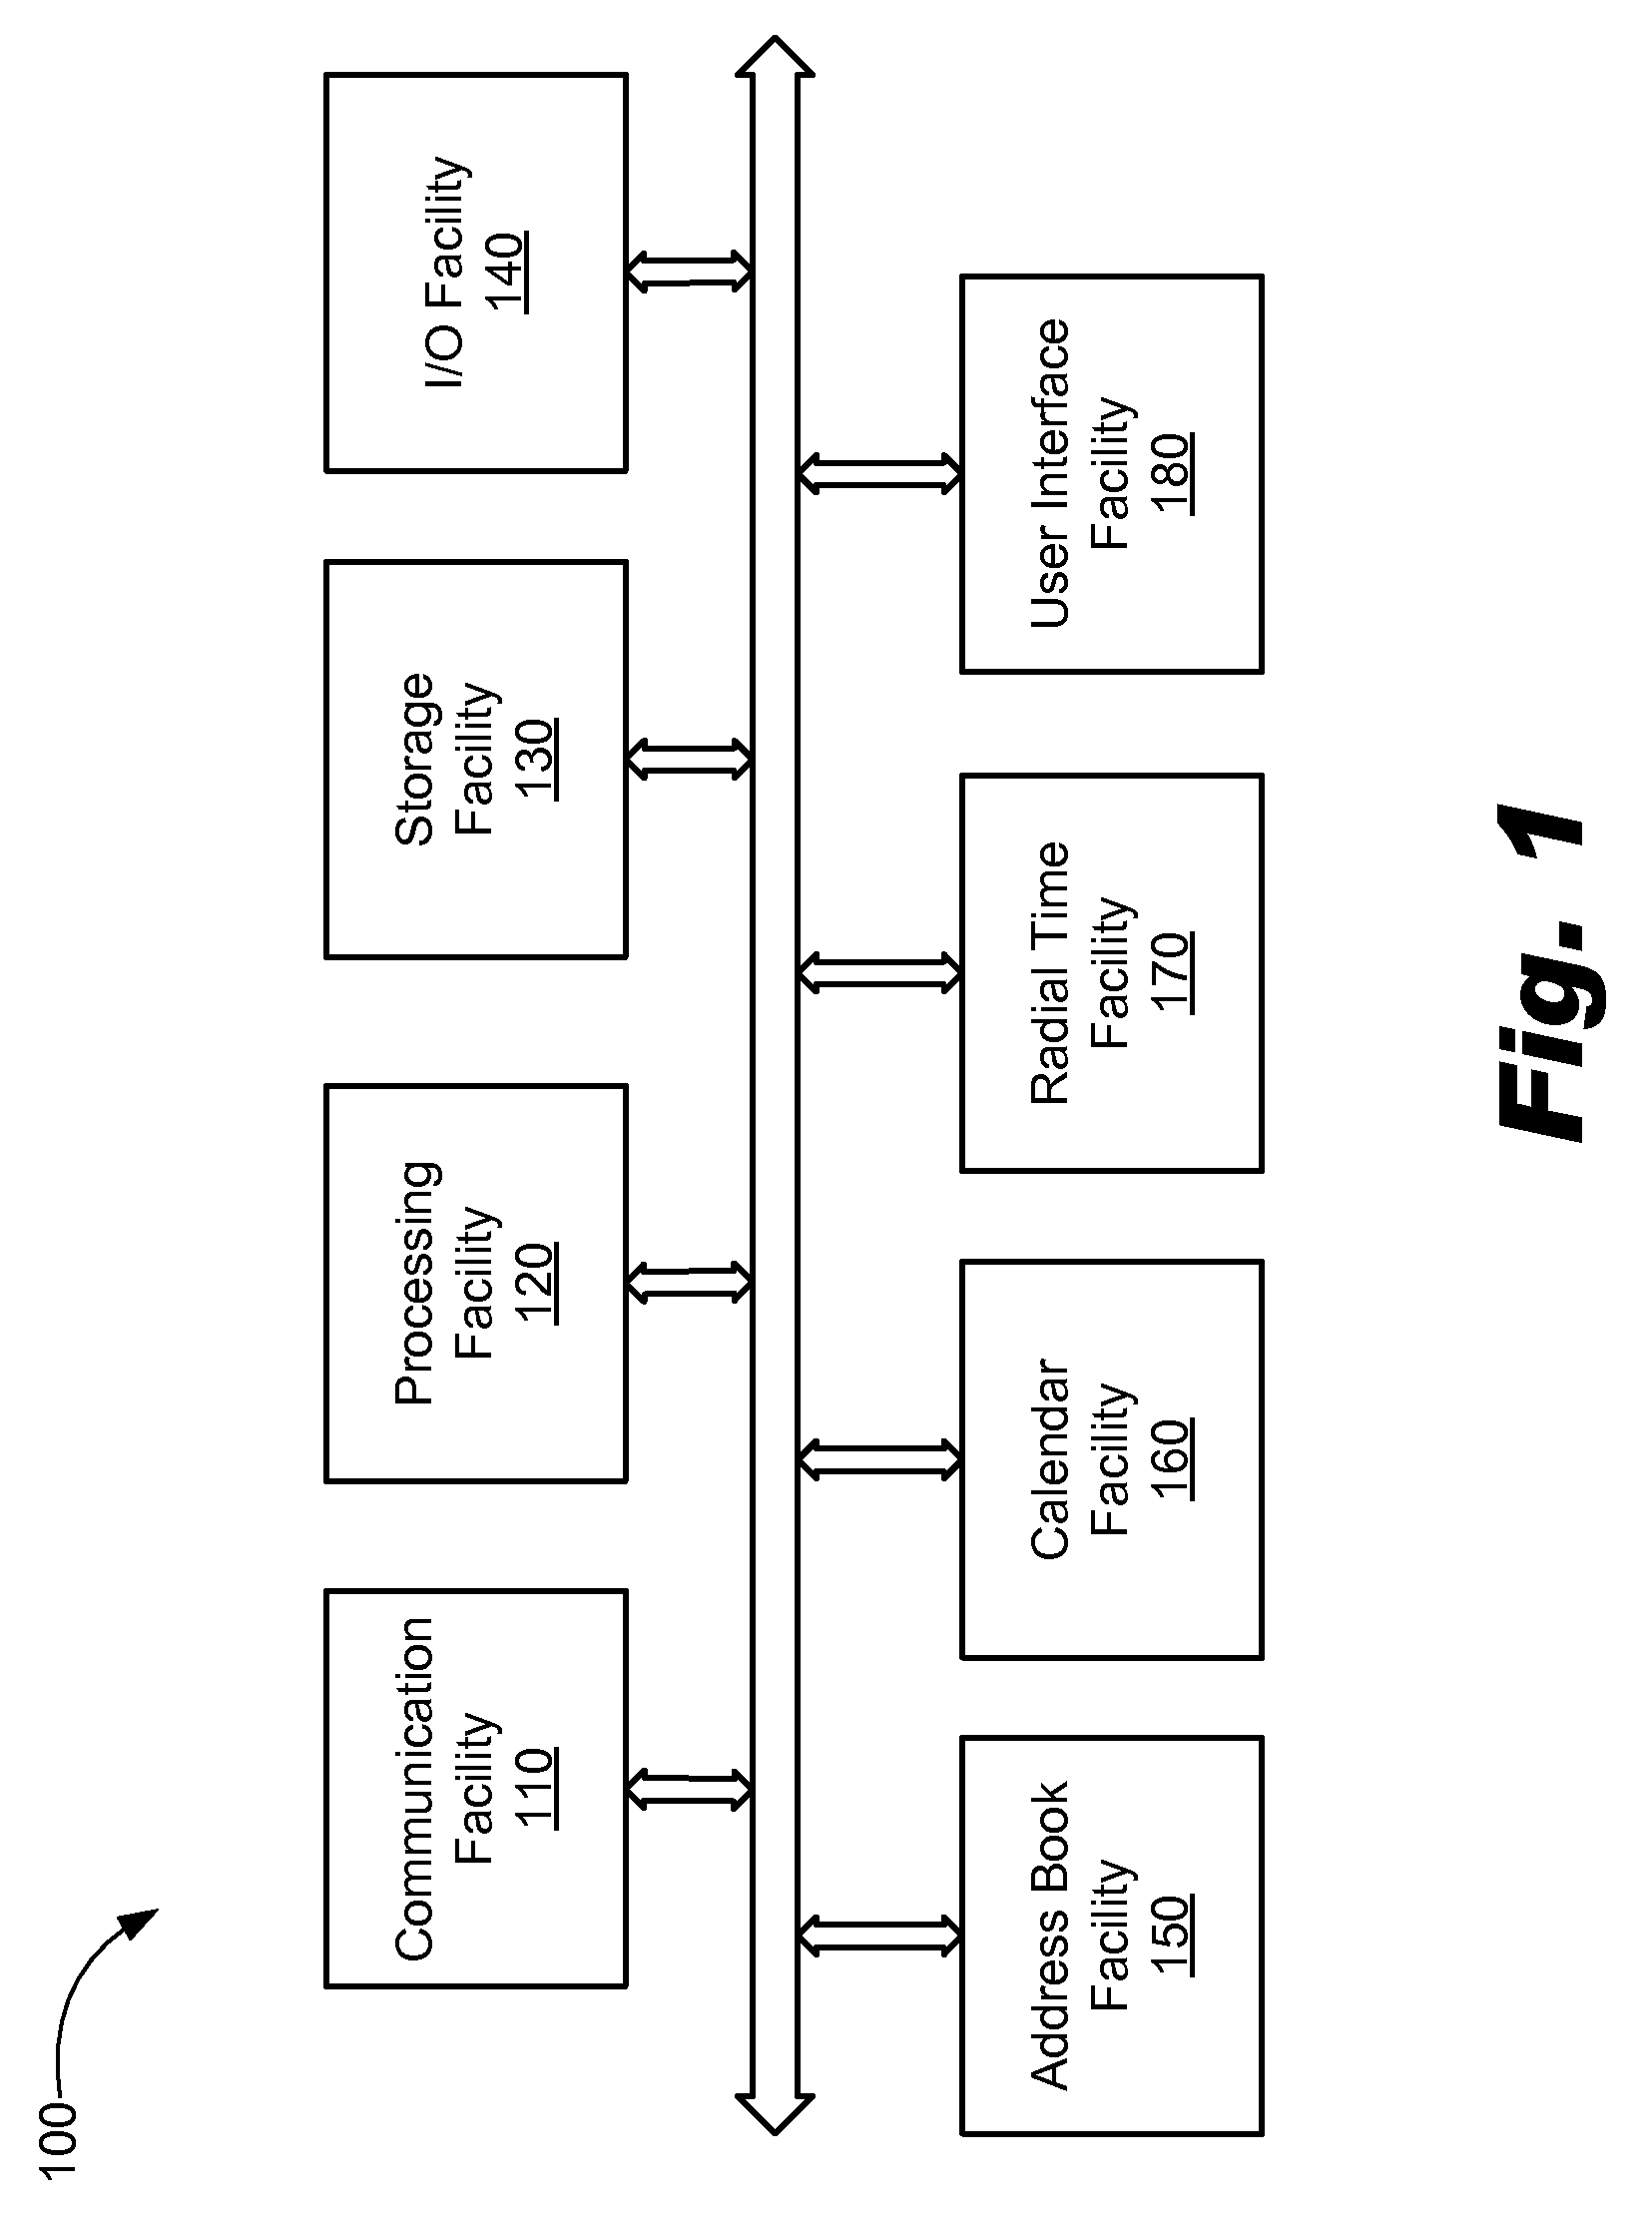 Systems and methods for radial display of time based information